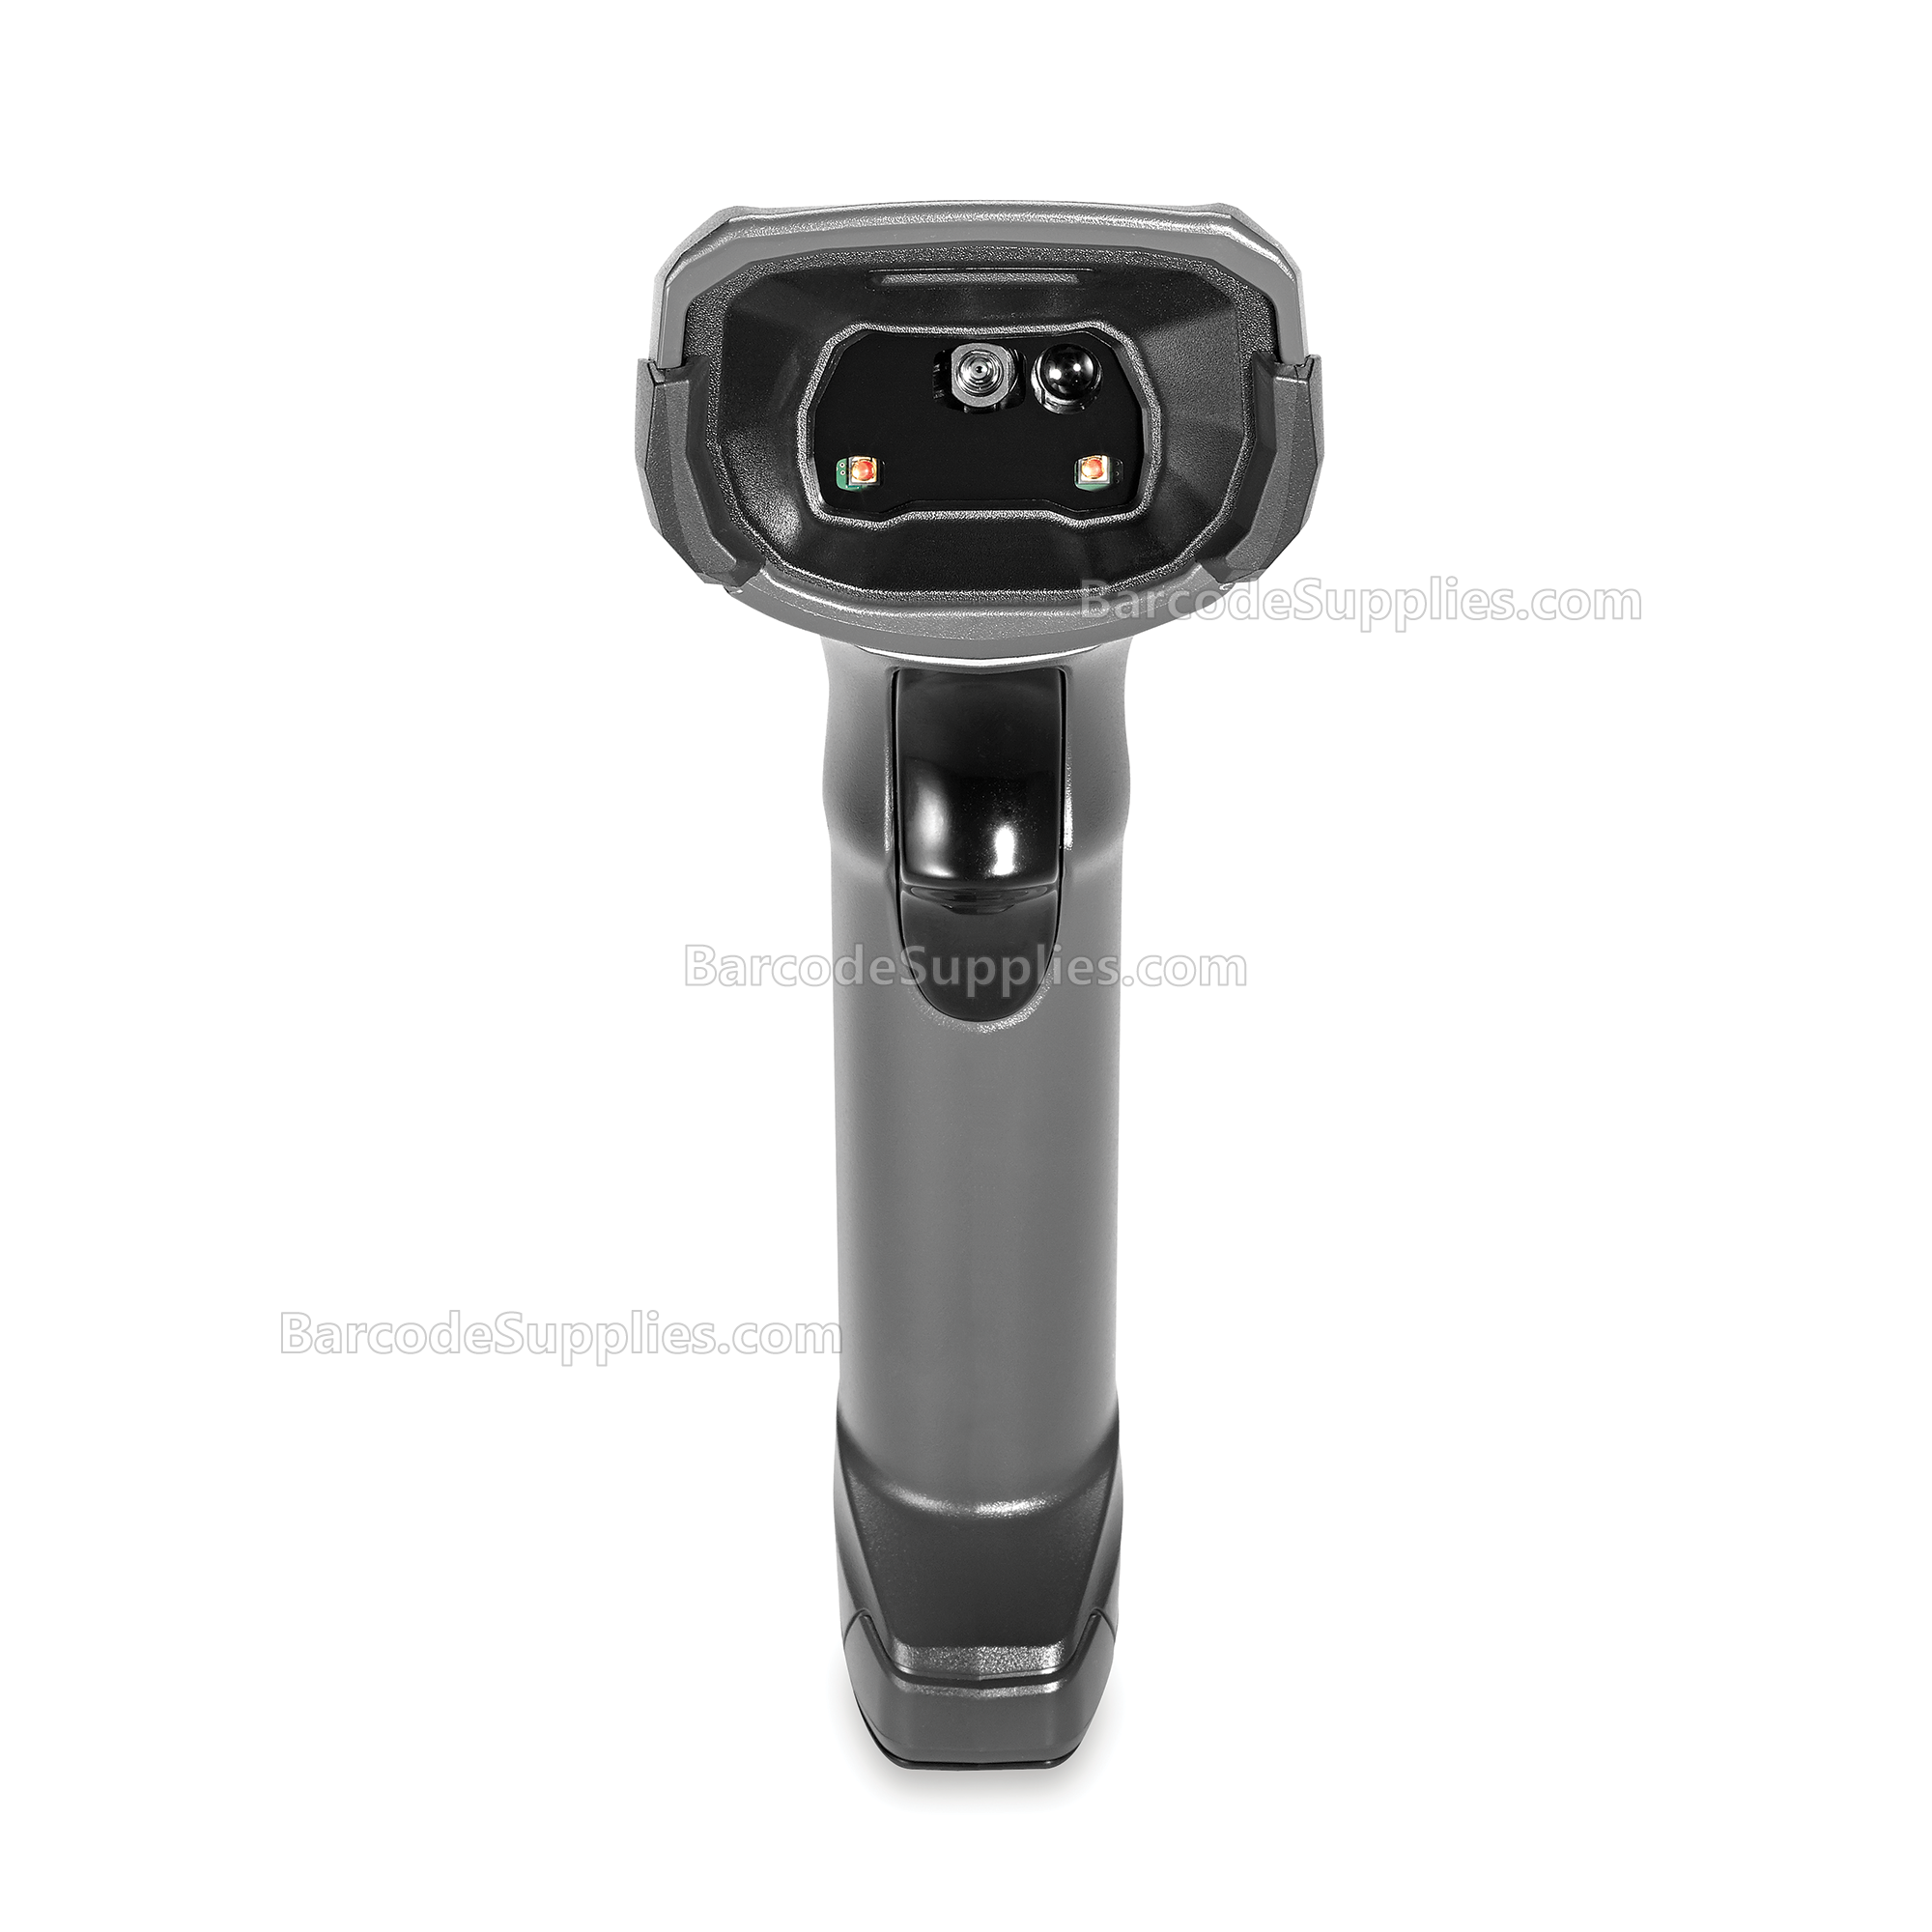 DS8108-SR Black (with Stand) USB KIT: DS8108-SR00007ZZWW Scanner, CBA-U21-S07ZBR Shielded USB Cable, 20-71043-04R Stand